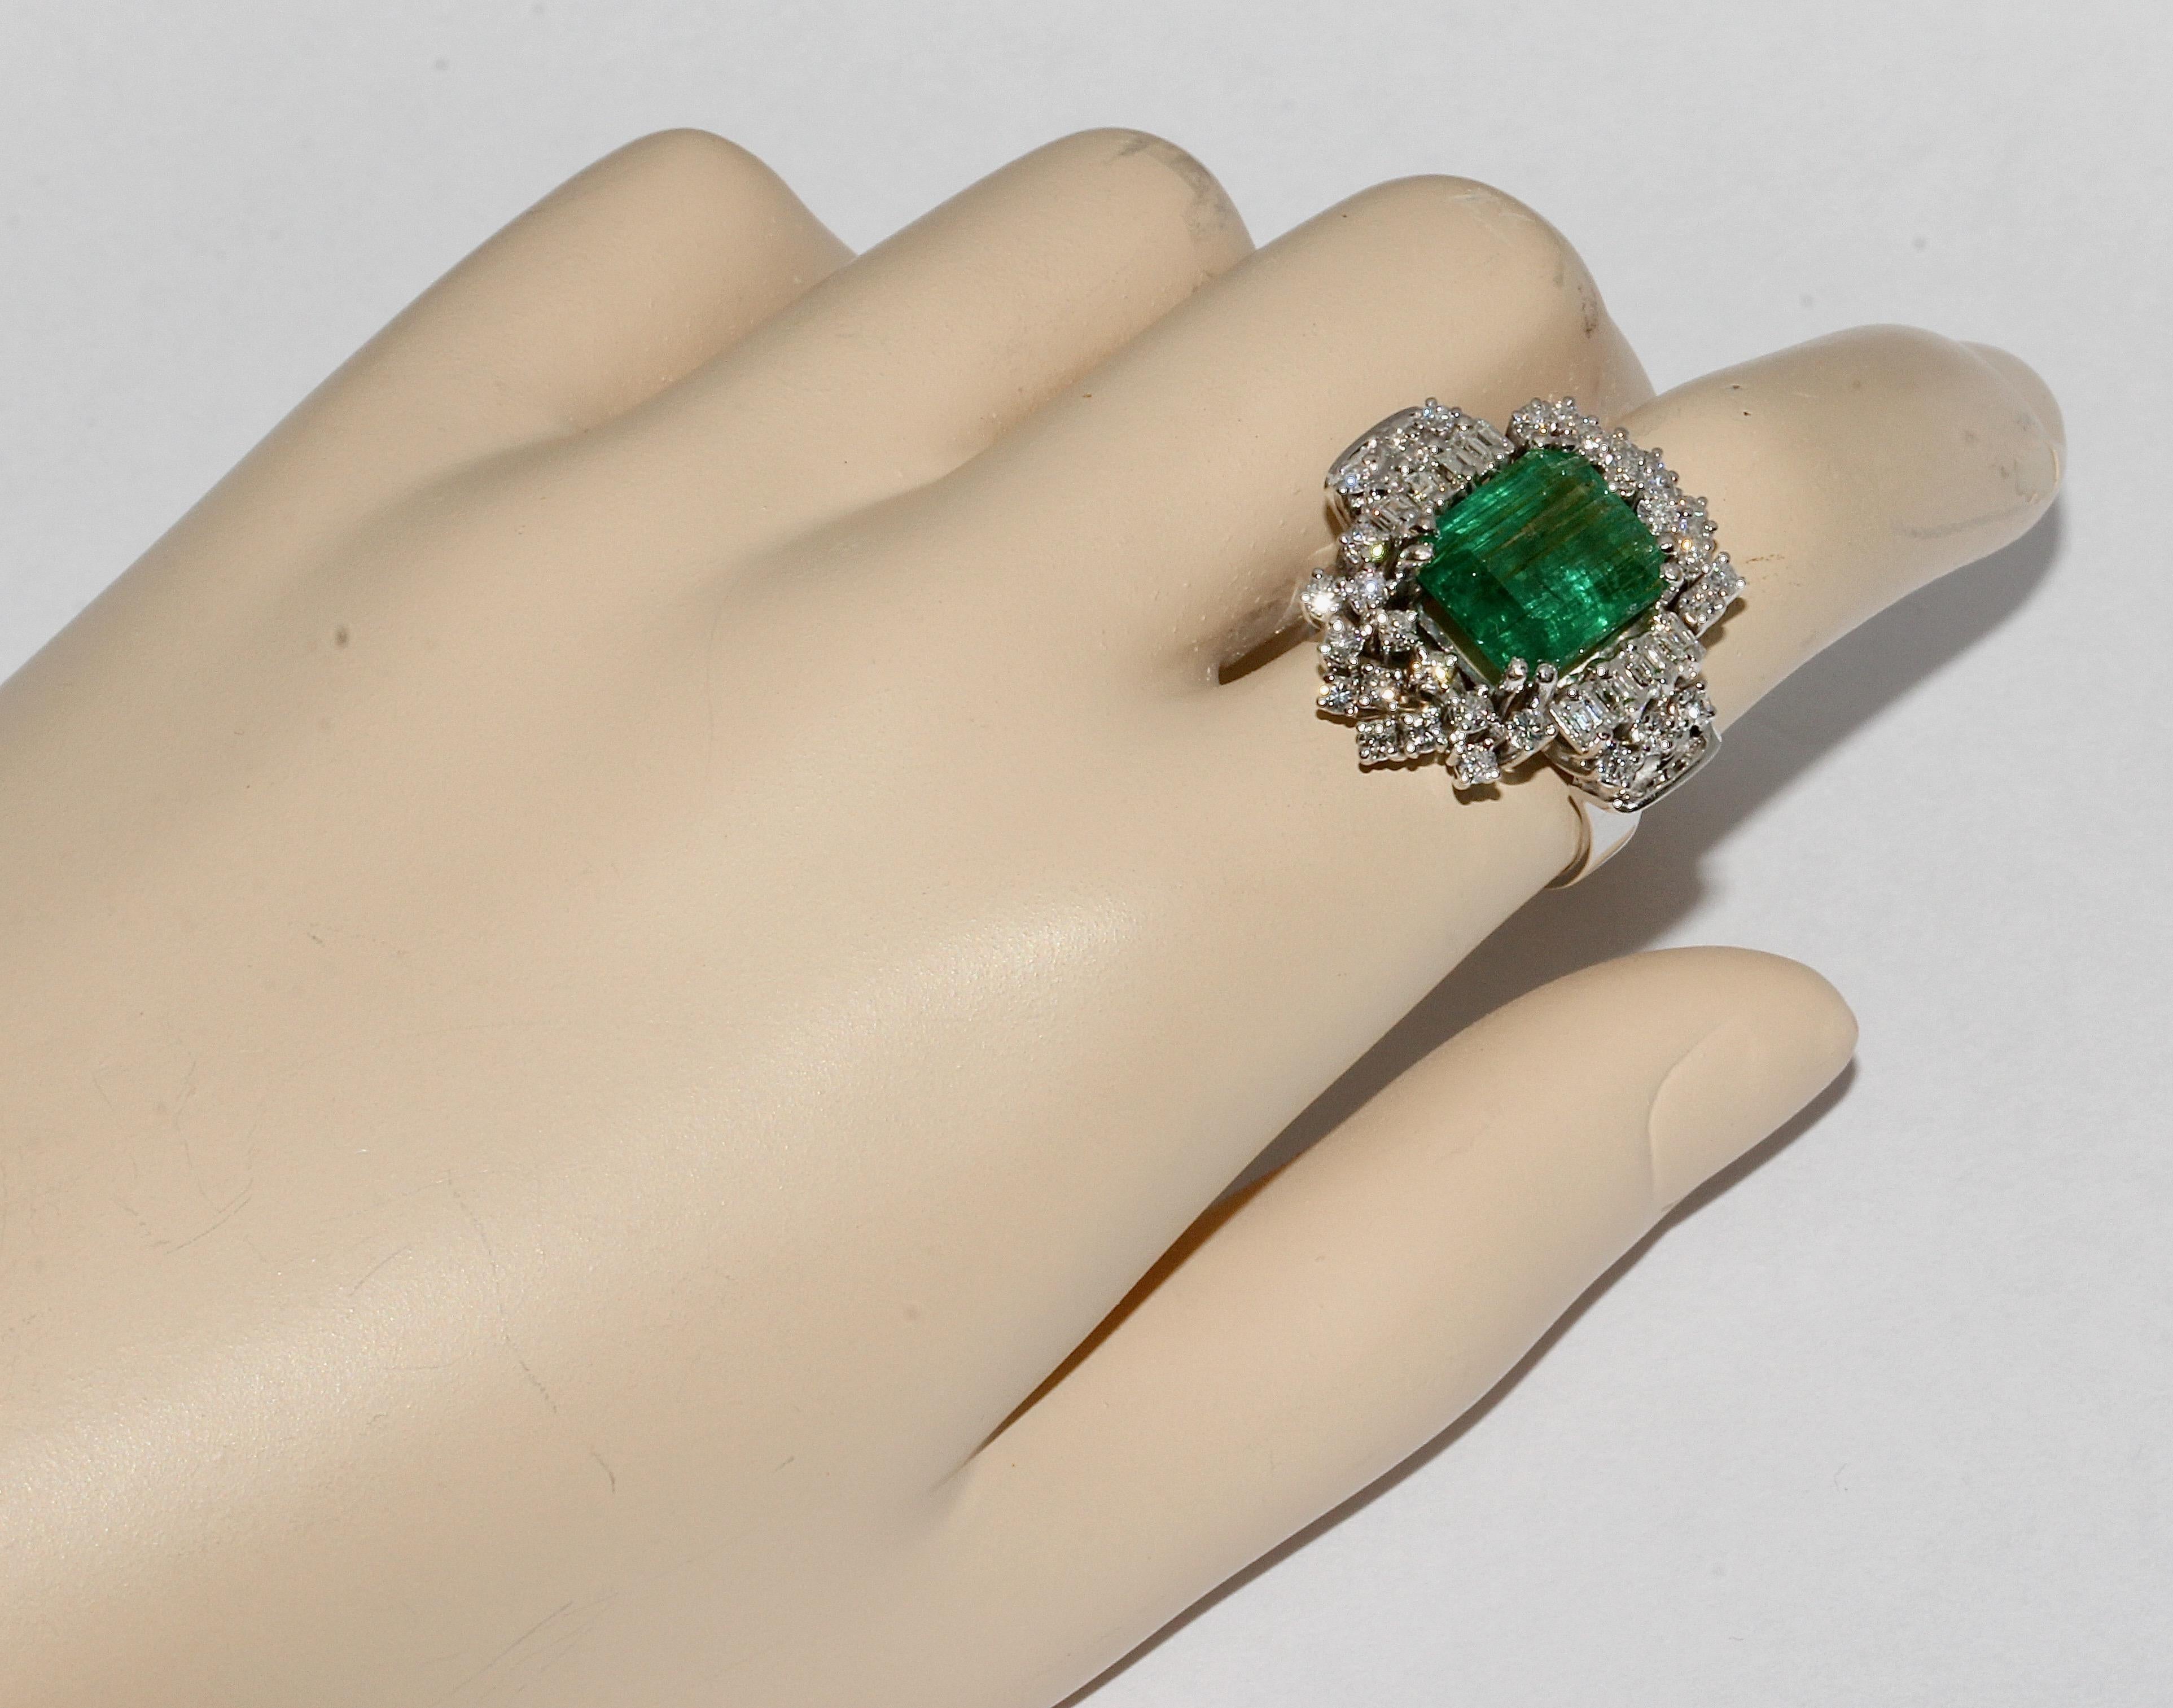 18 Karat White Gold Ring Set with White Diamonds and Large 4.5 Carat Emerald For Sale 1